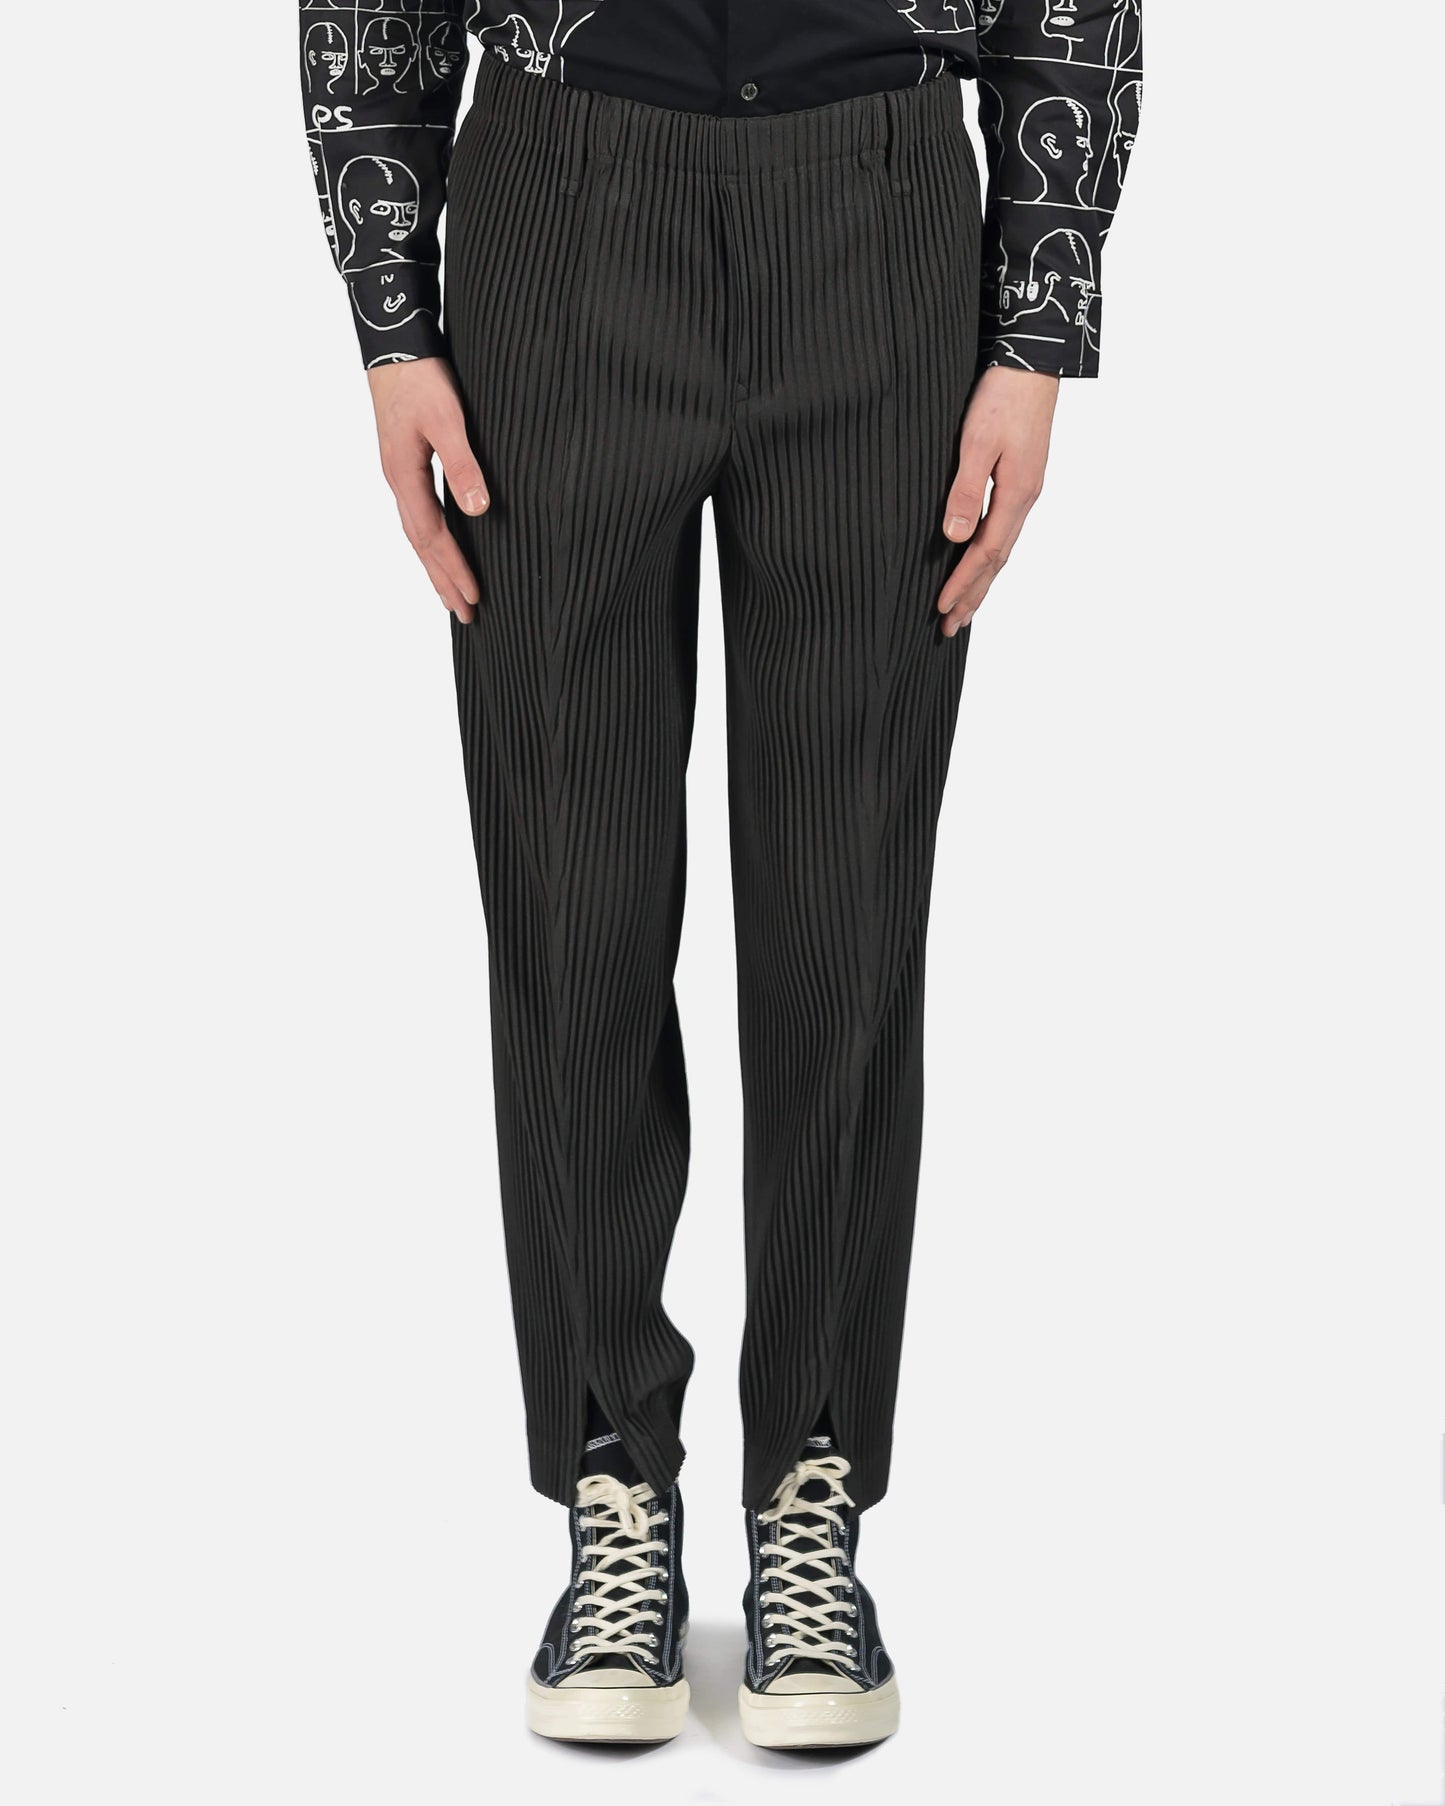 Homme Plissé Issey Miyake Men's Pants Front Slit Pleats Trousers in Charcoal